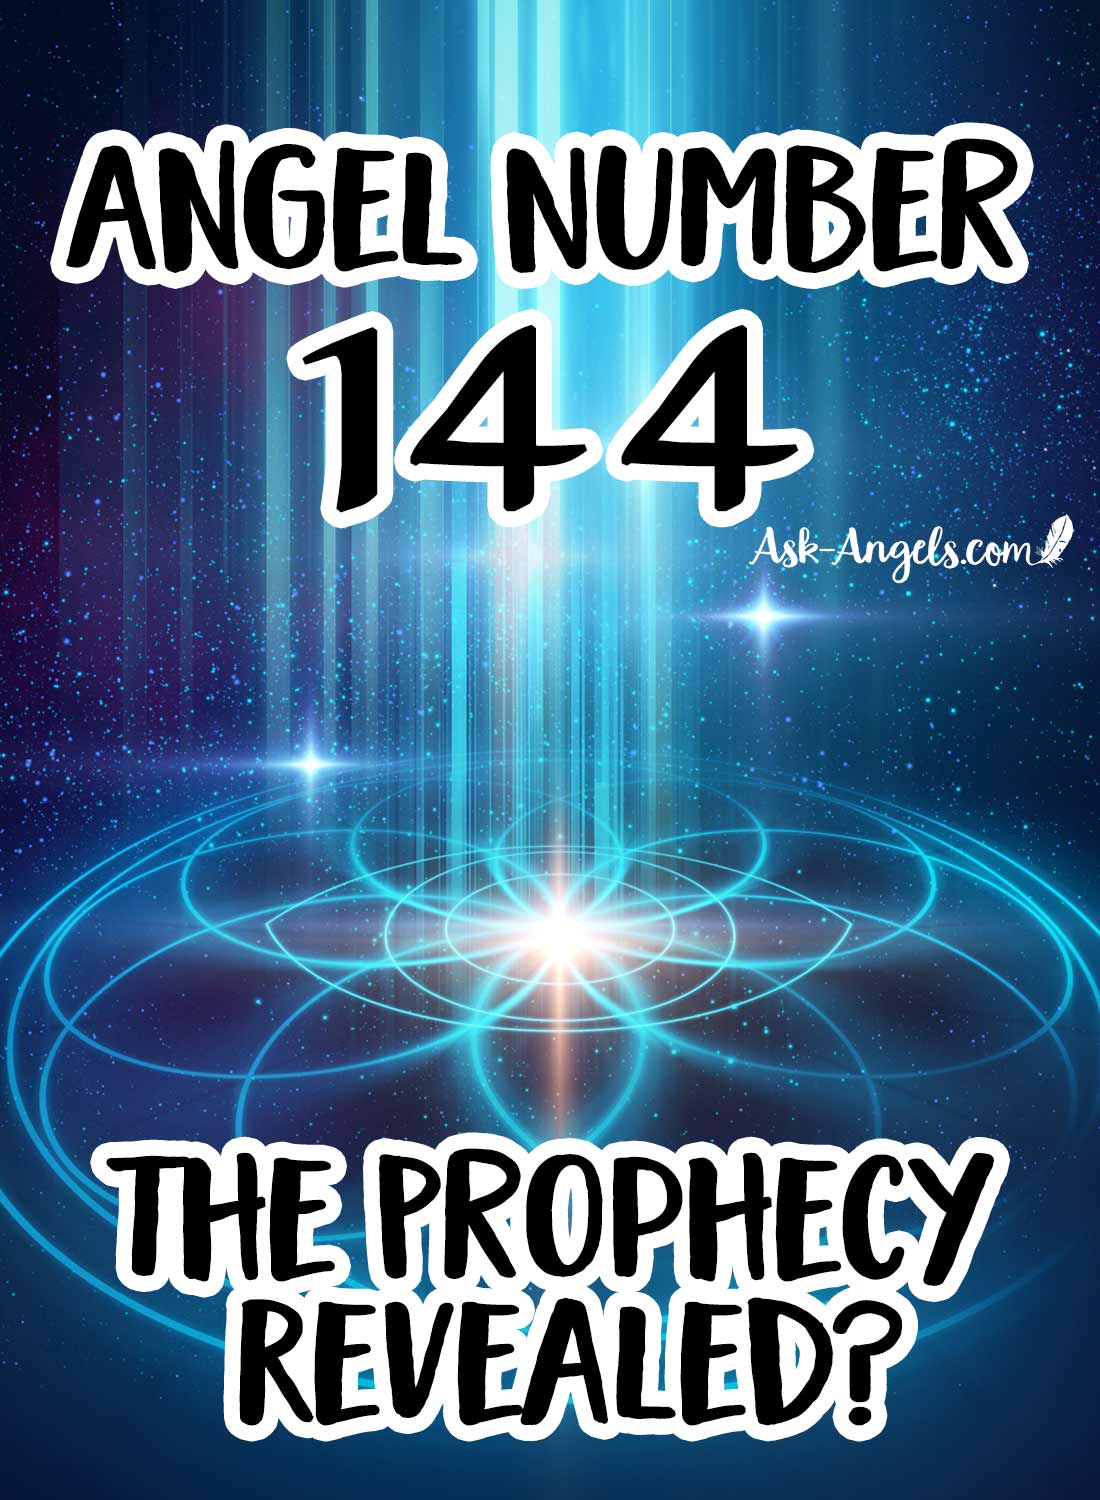 Angel Number 144 - The Prophecy of 144,000 Lightworkers Revealed?